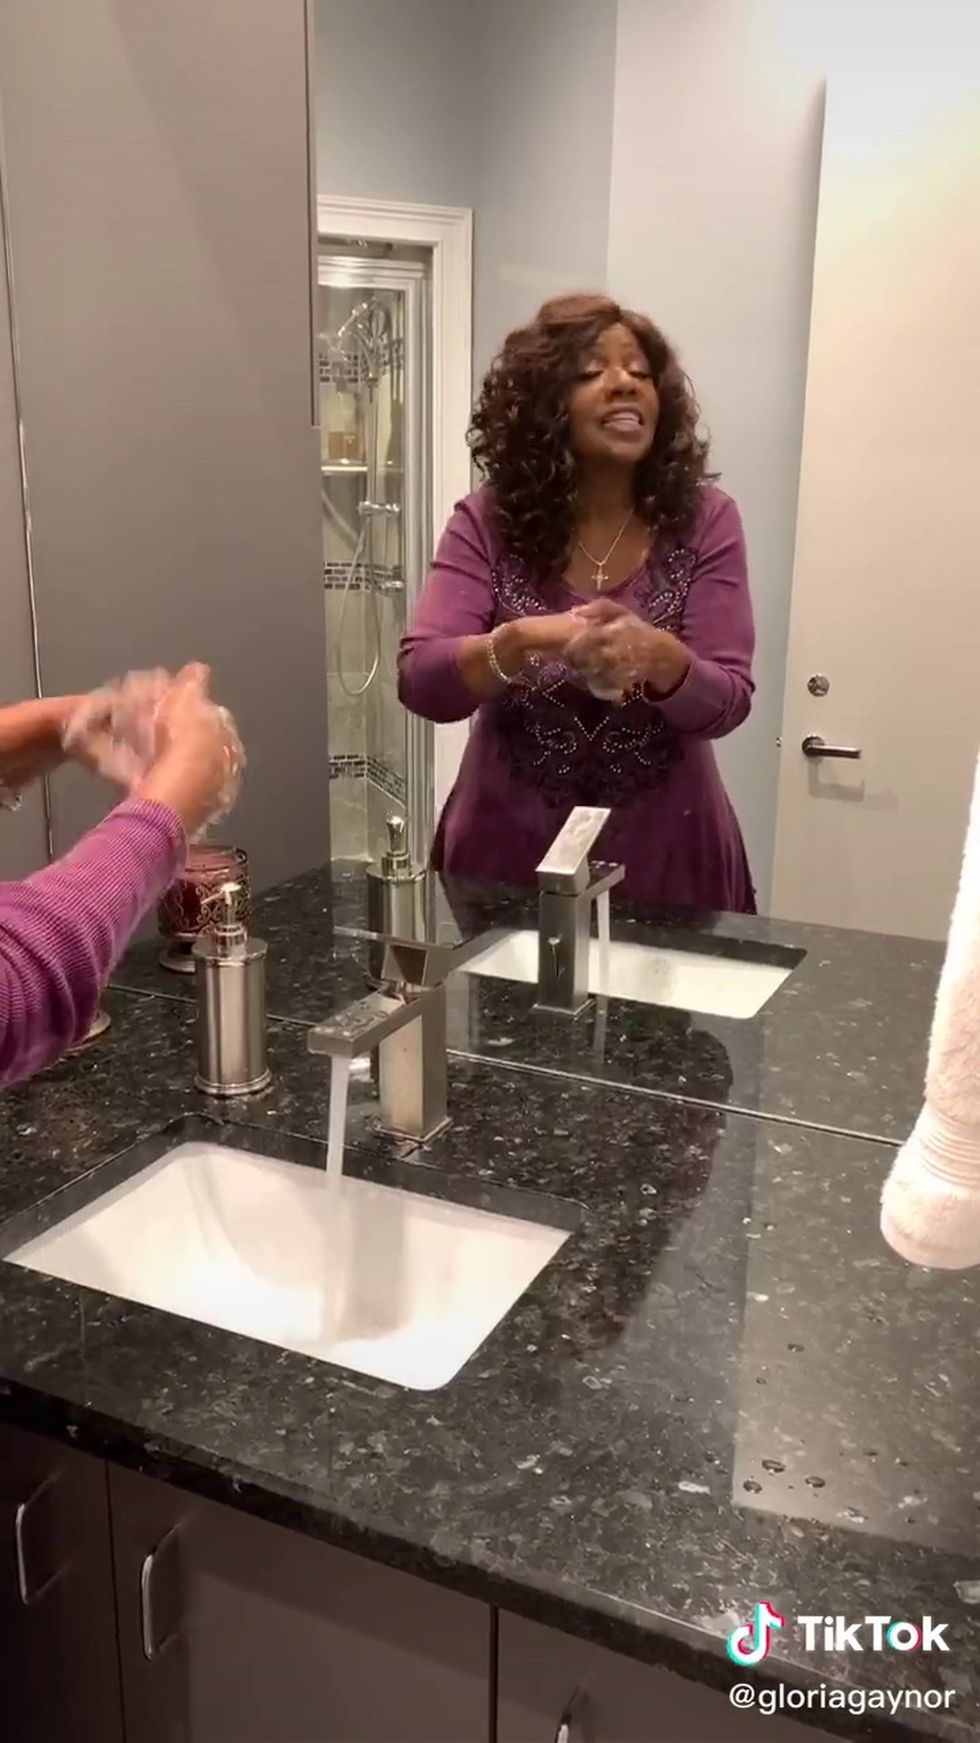 Gloria Gaynor shares video of her washing hands to 'I Will Survive'